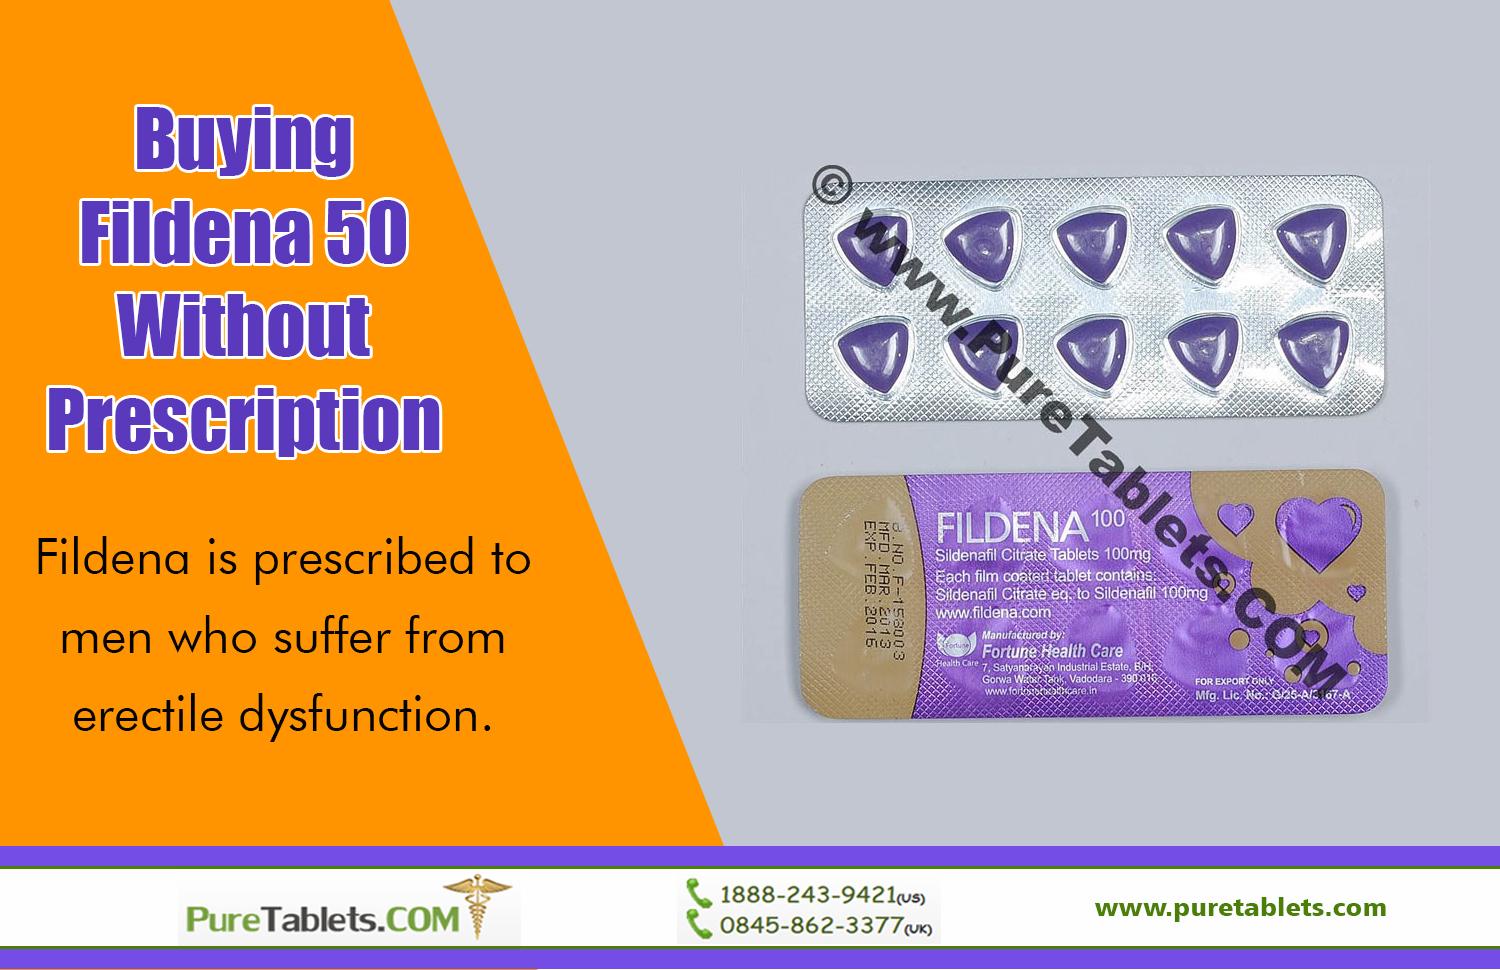 Buying Fildena 50 Without Prescription